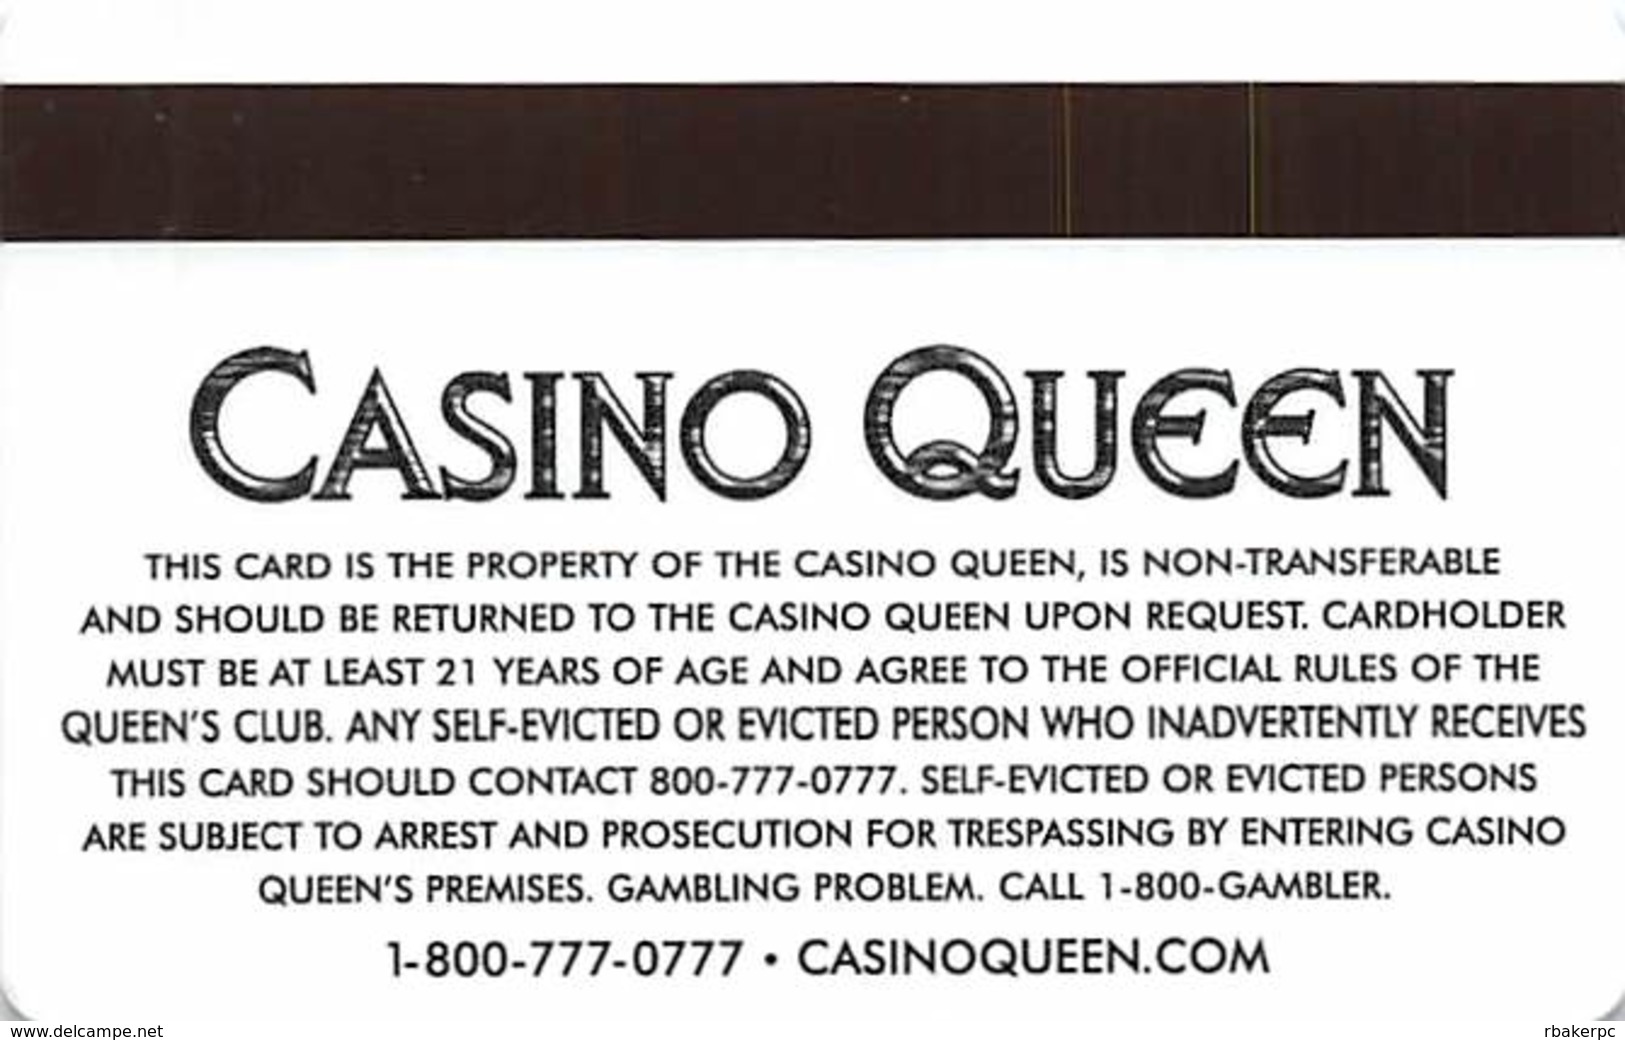 Casino Queen - East St. Louis, IL - BLANK Slot Card - Majestic Card Expires July 31, 2008 - Casino Cards